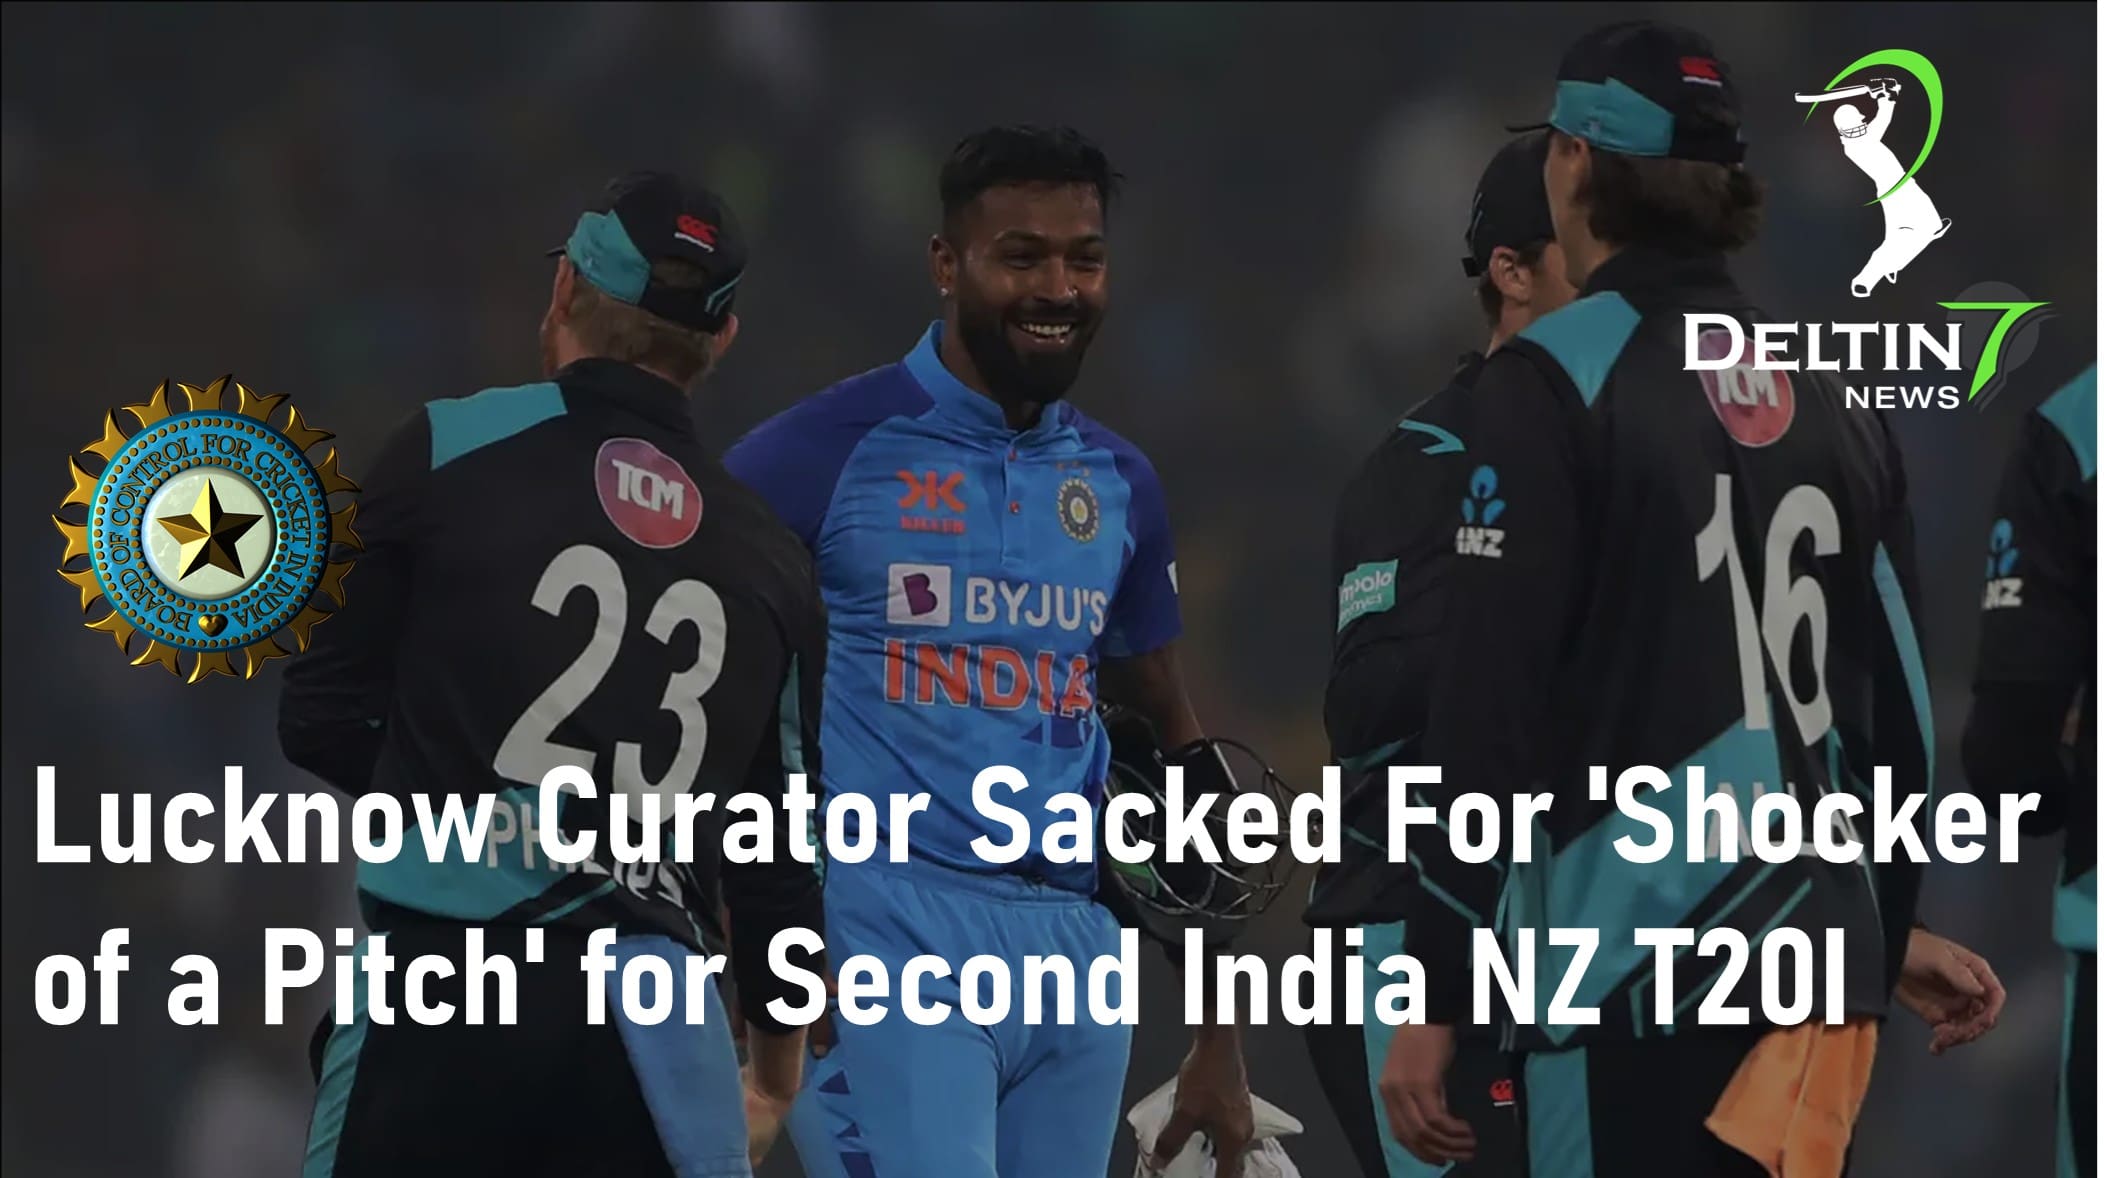 Lucknow India Curator Sacked For “Shocker of a Pitch” for Second India NZ T20I